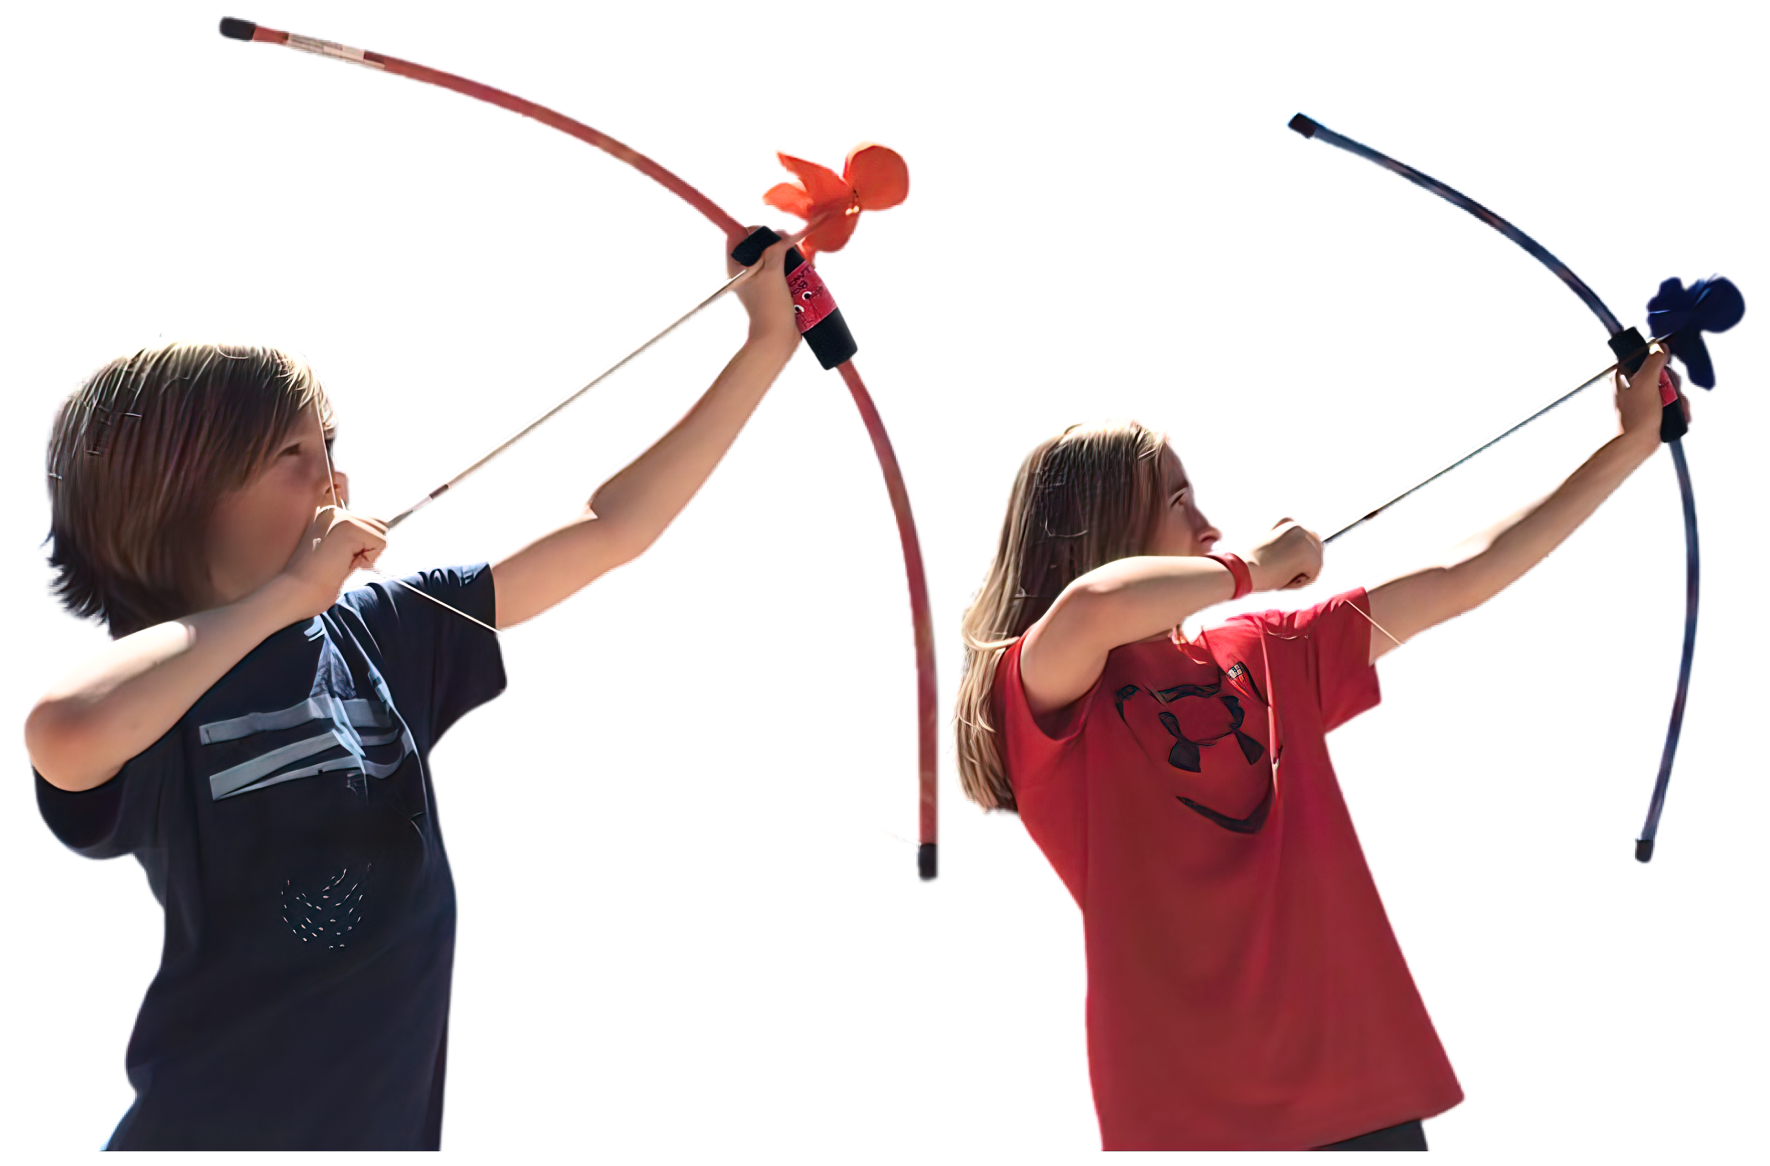 how to make a simple bow and arrow